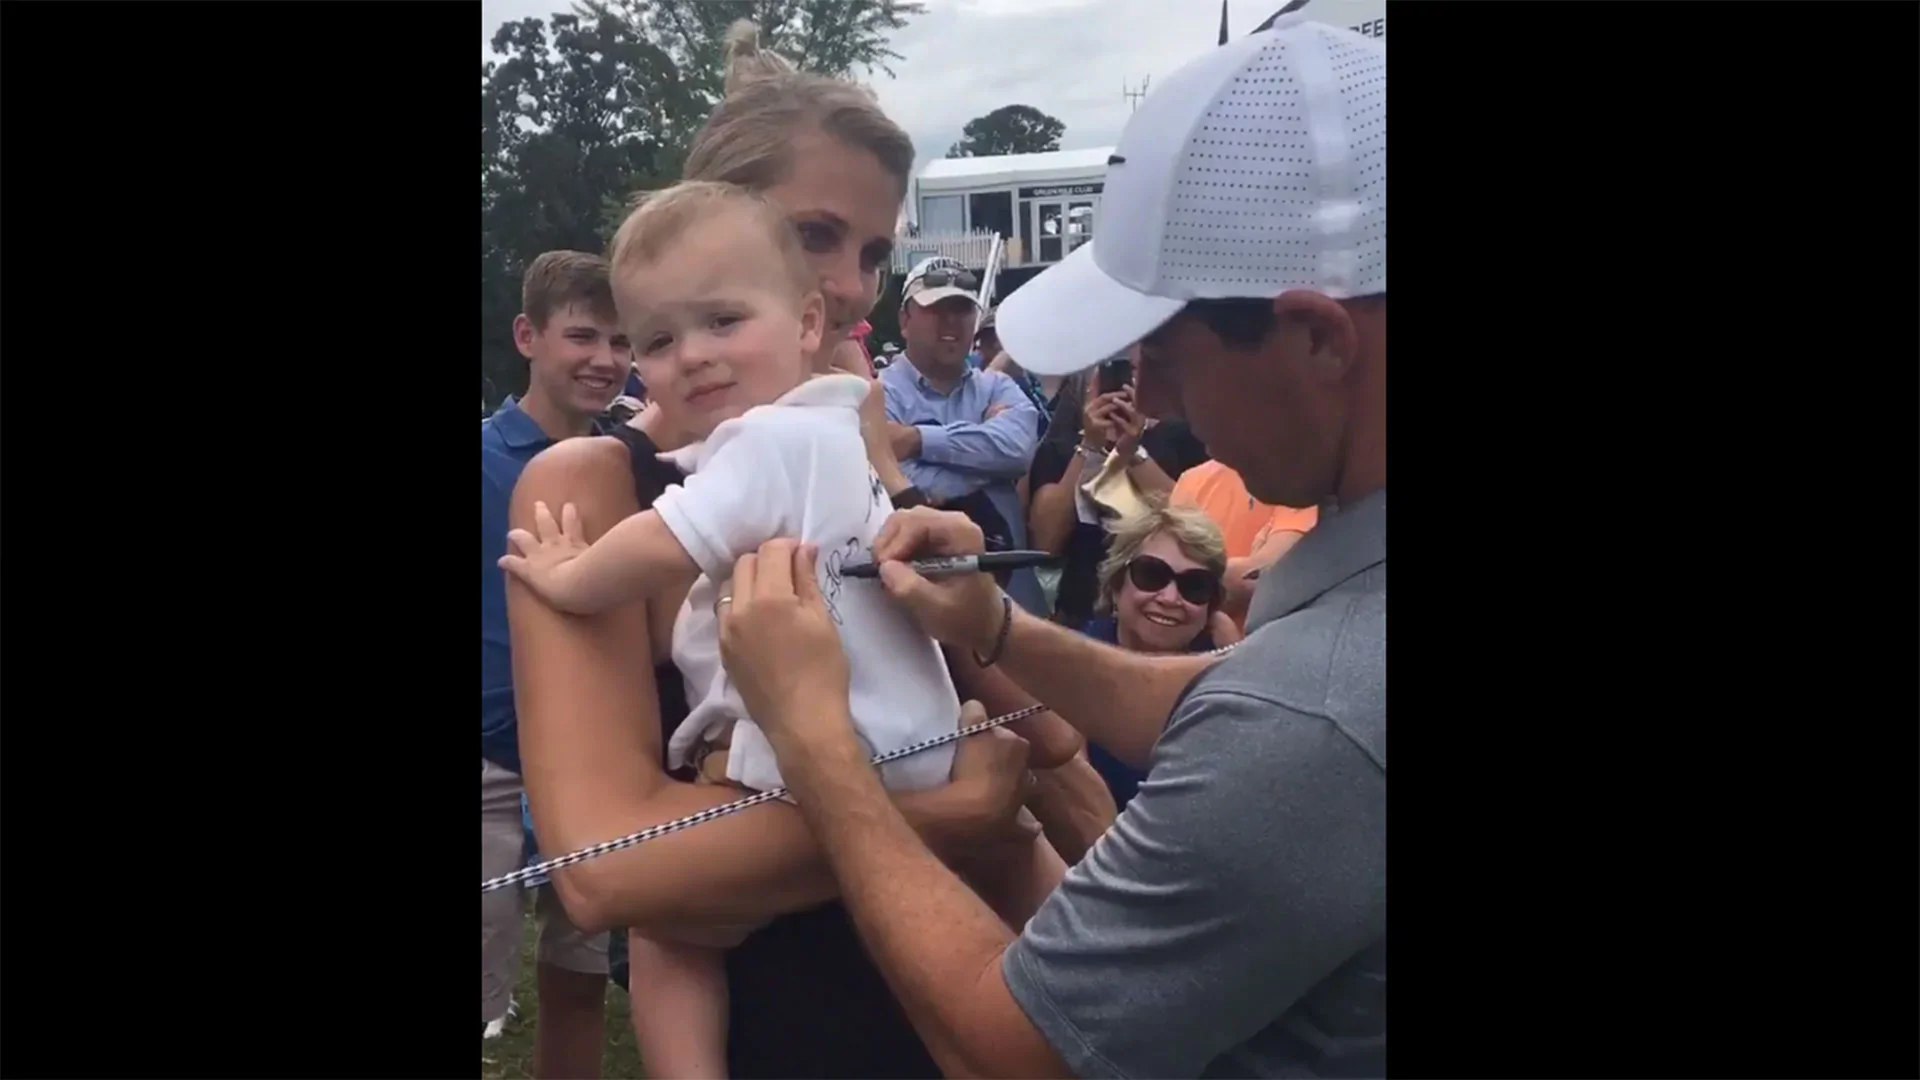 McIlroy autographs a baby at Quail Hollow